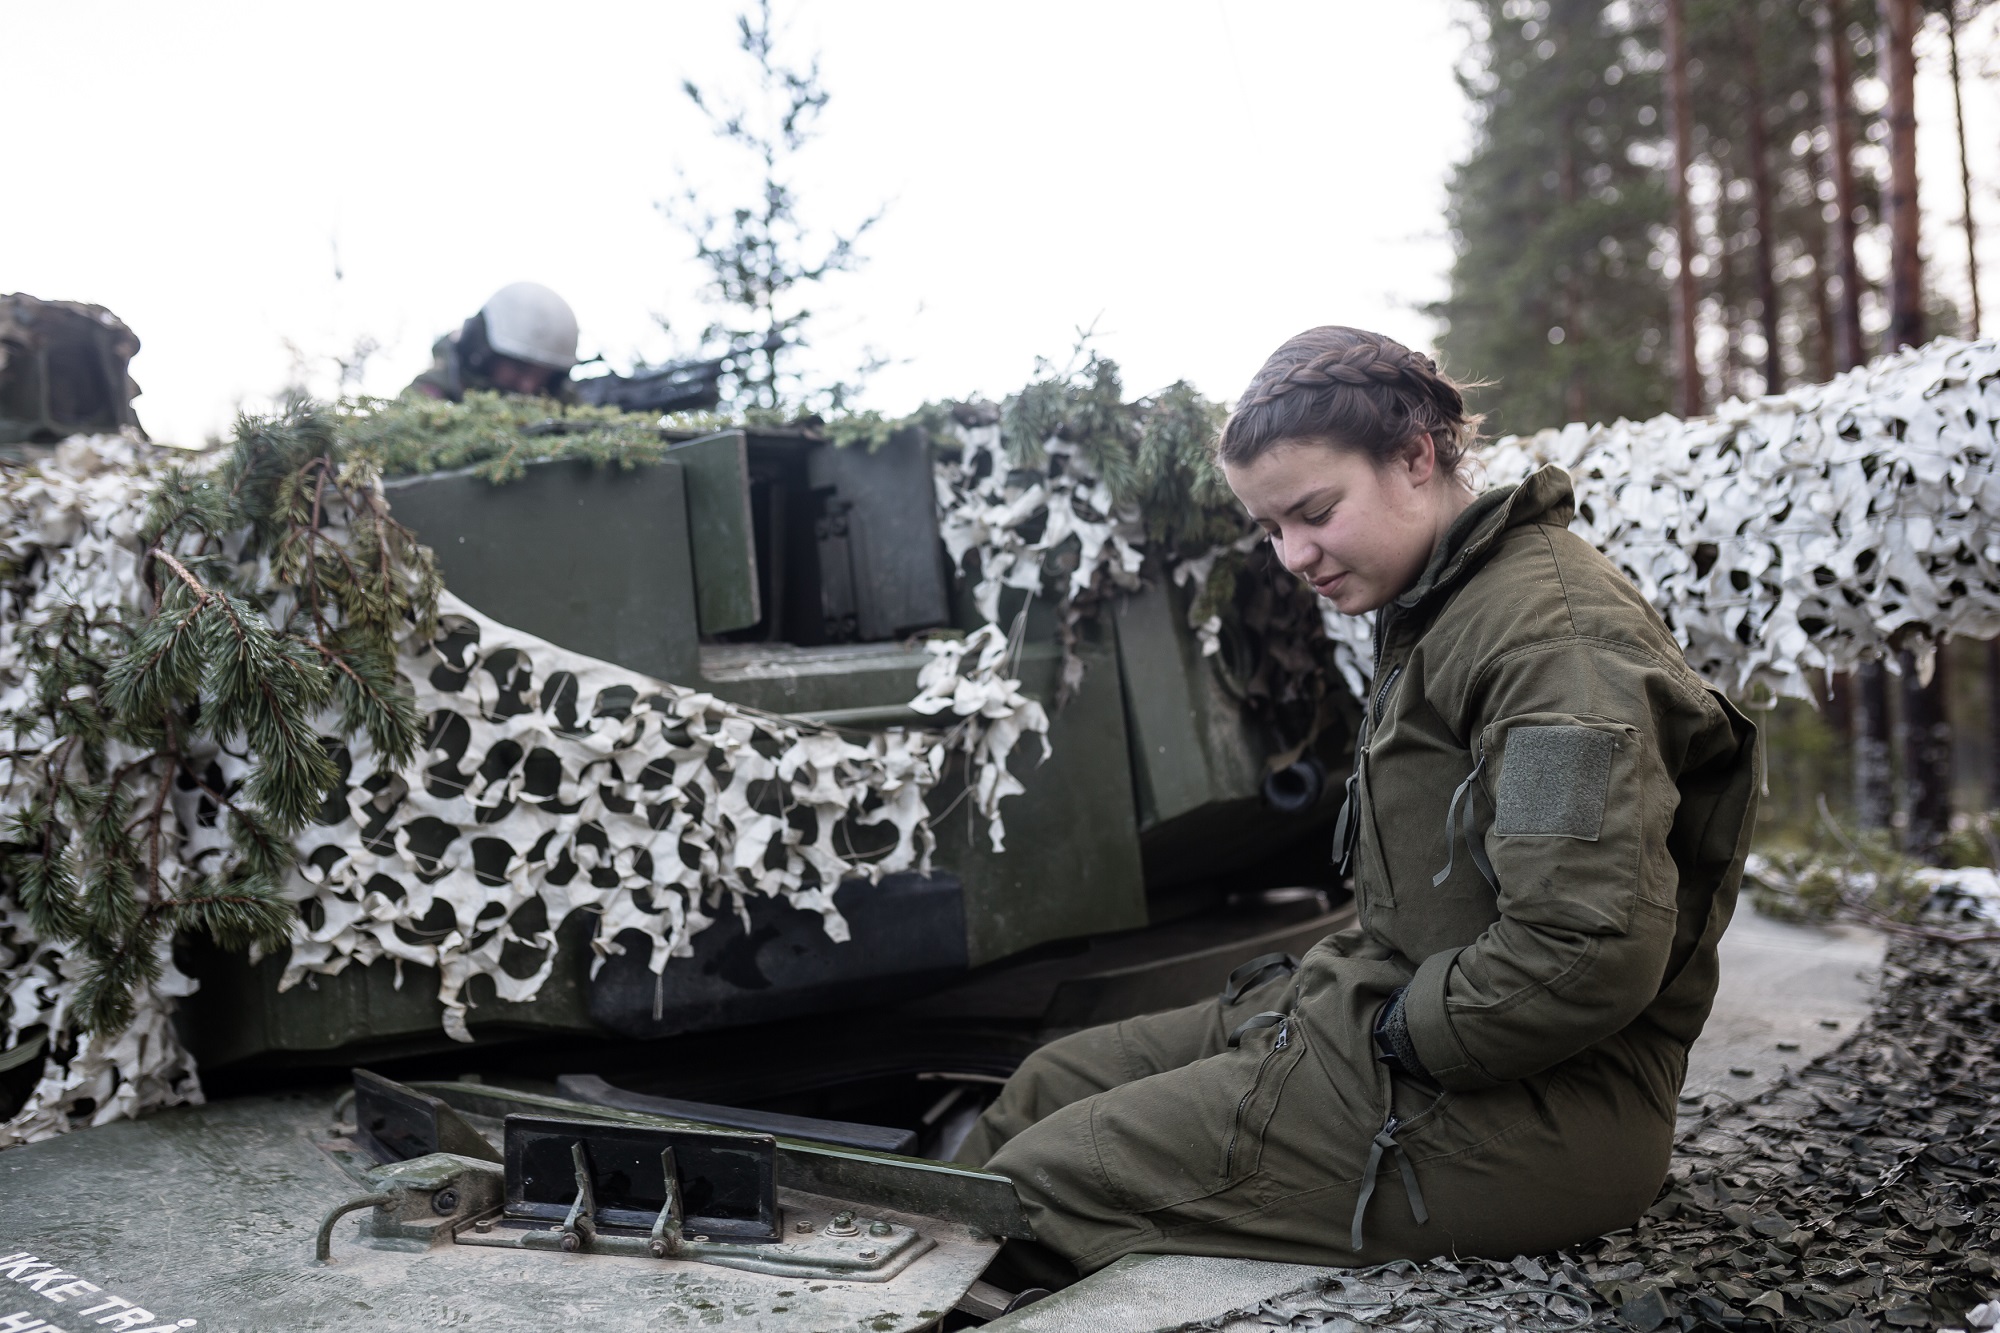 The members of a Norwegian Leopard 2A4 in defensive posture as wait for order to advance against British and Danish troops during the live exercise on November 3, 2018 in Elval, Norway.